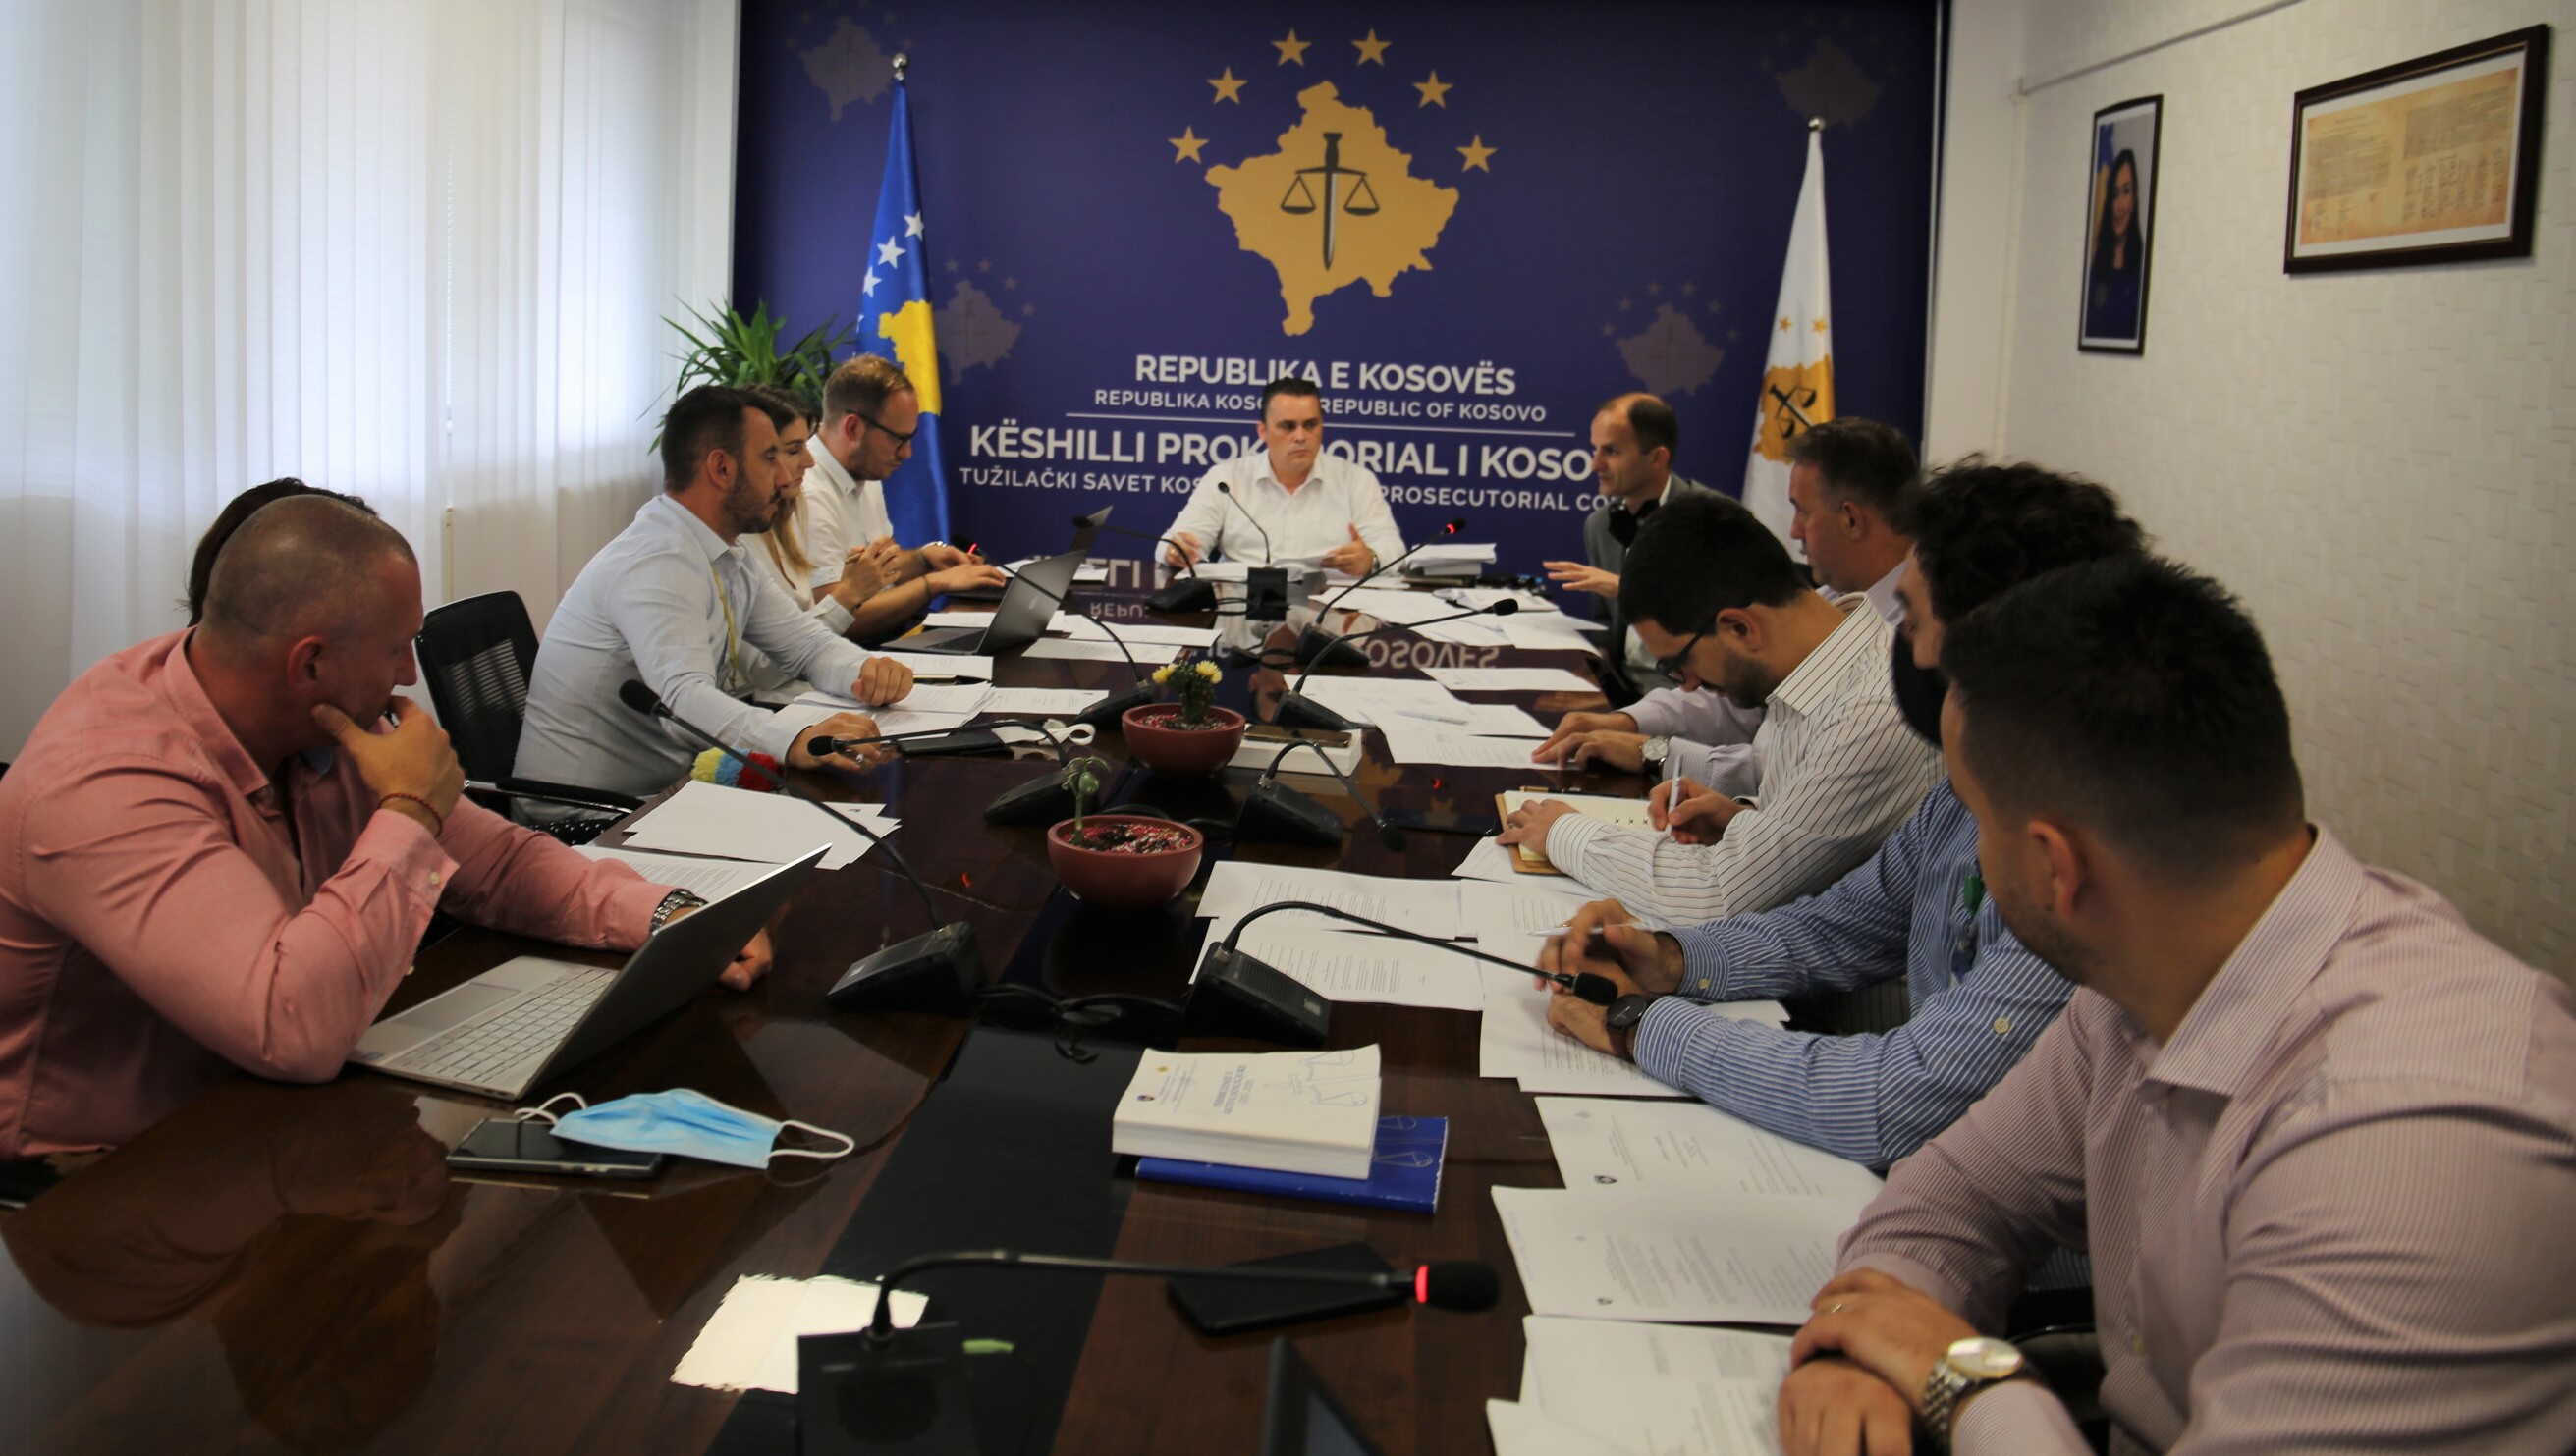 Work continues on drafting the Regulation on the transfer and promotion of State prosecutors